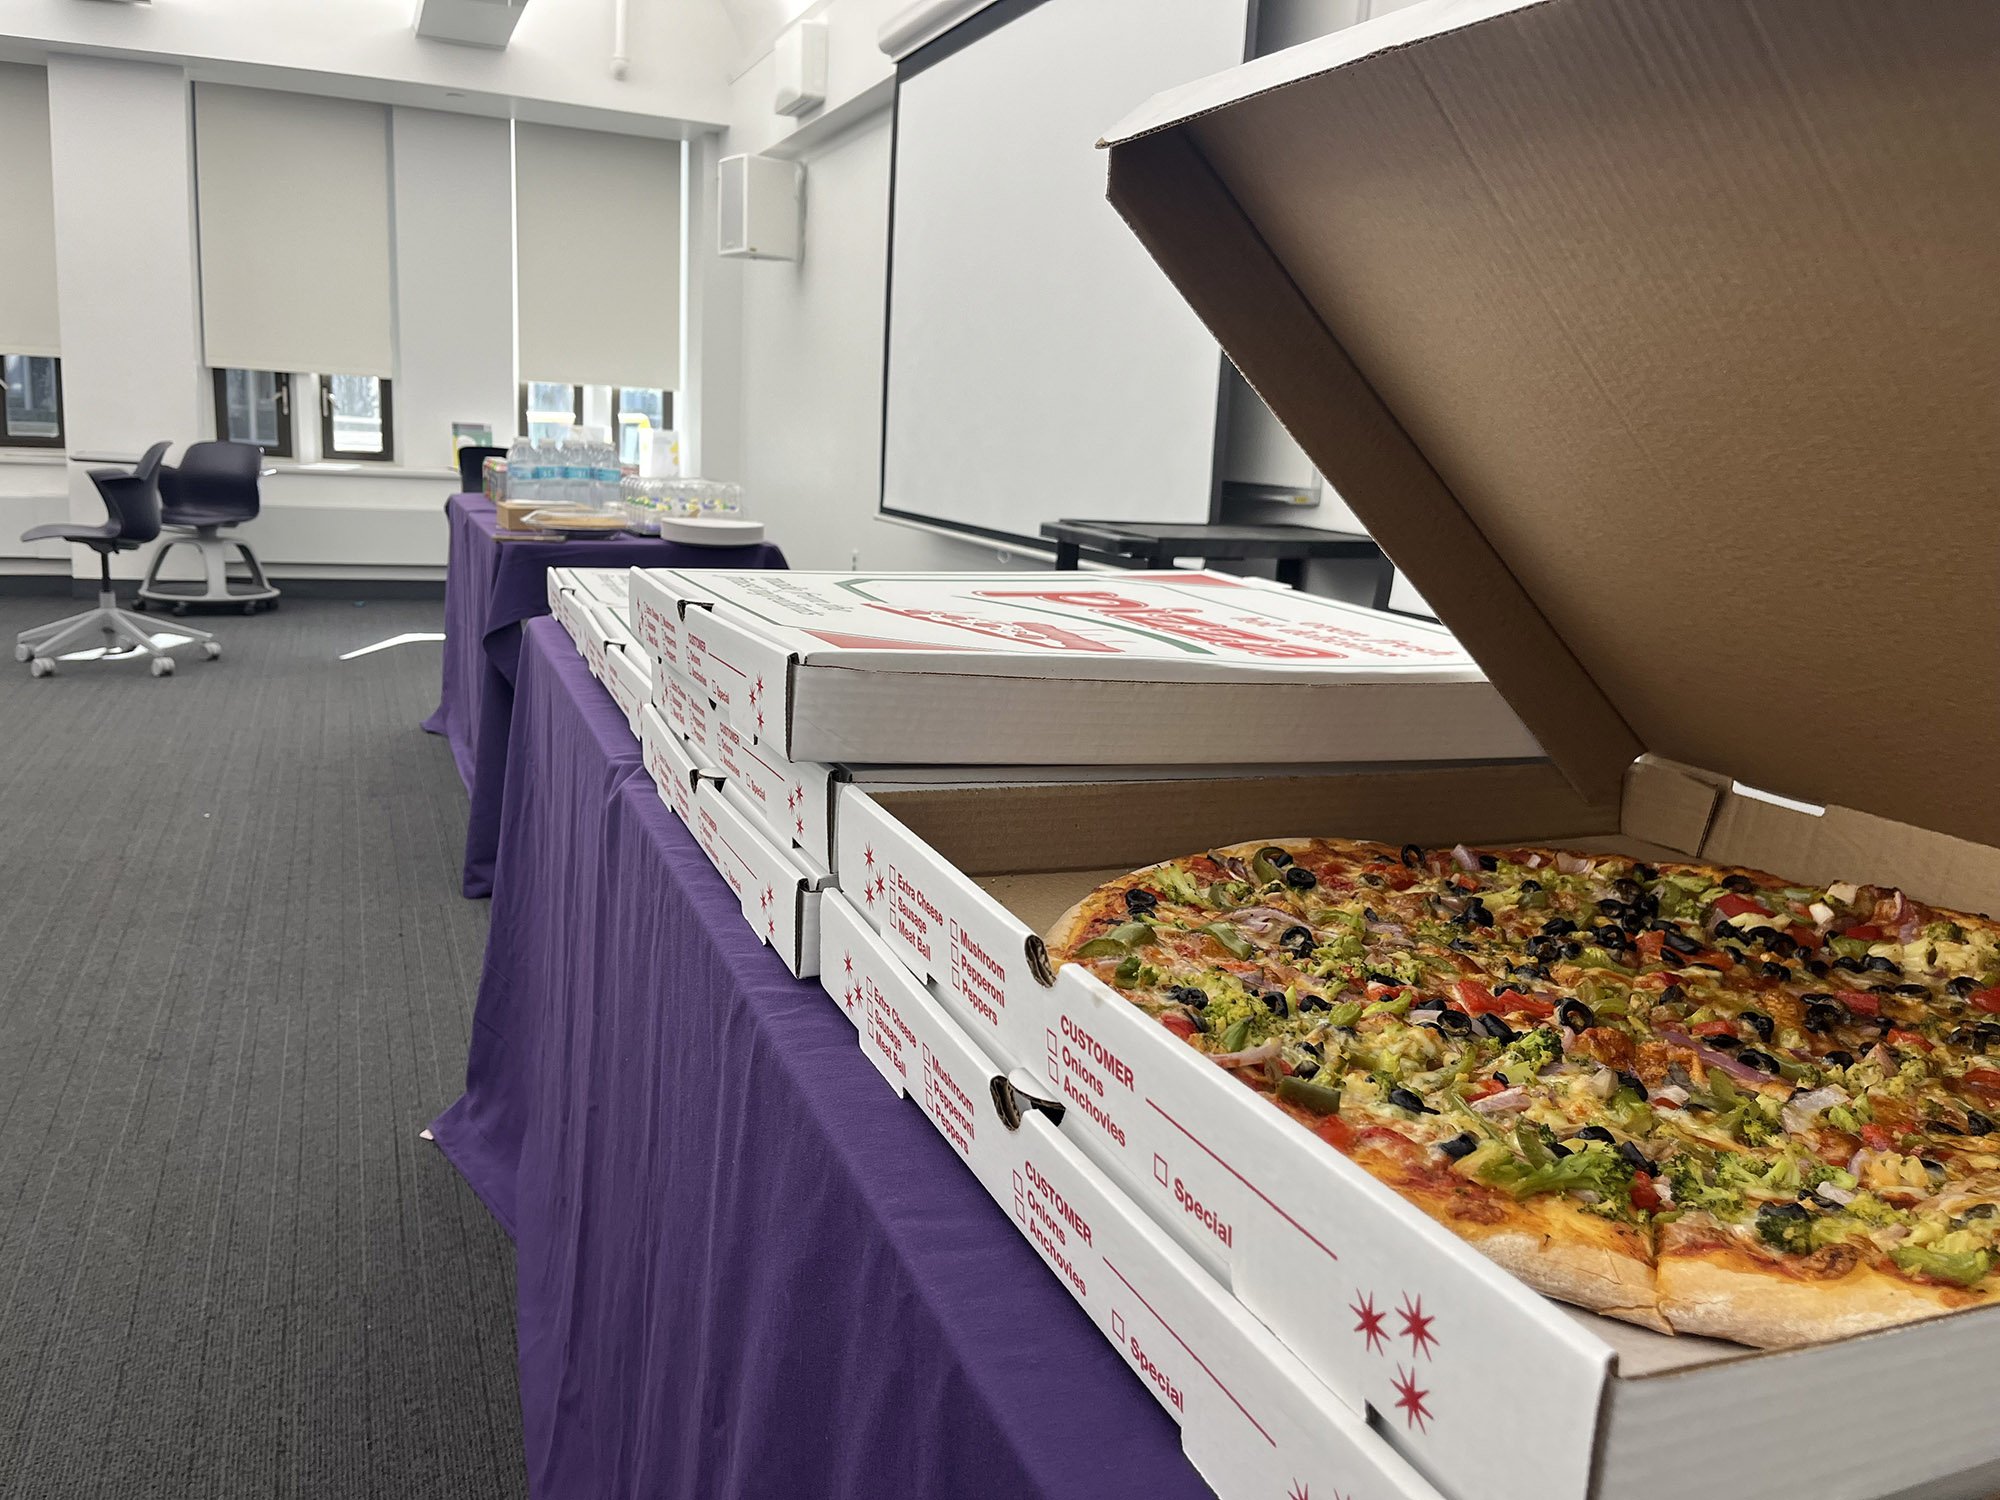 several boxes of pizza are on a table with a purple table skirt.